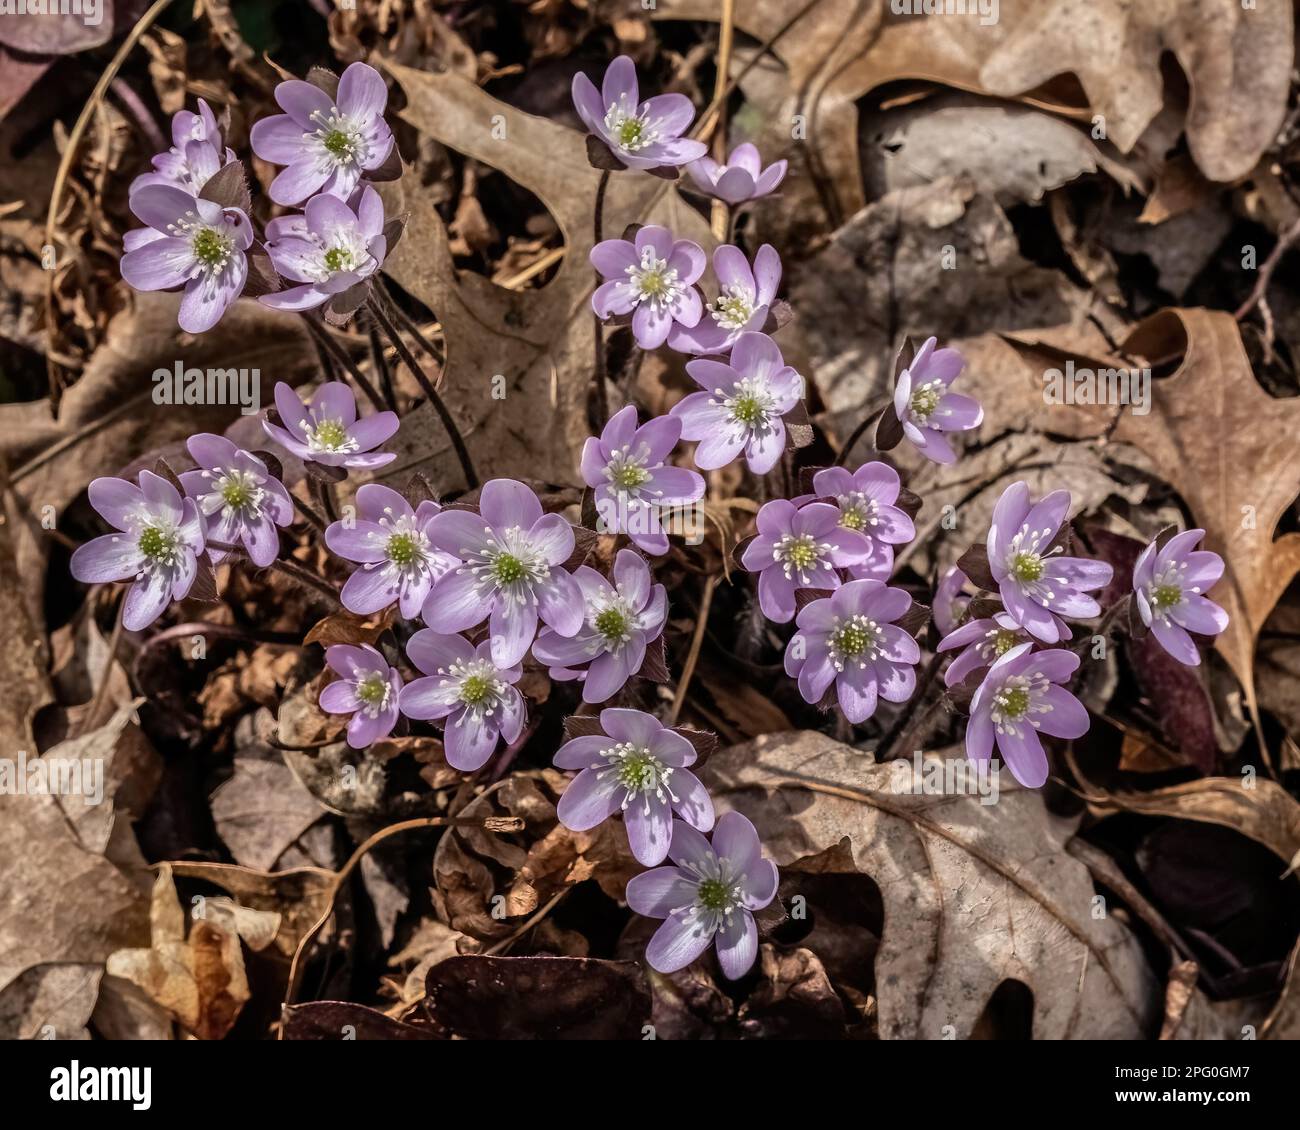 Purple hepatica wildflowers blooming in the springtime woods at Taylors Falls Lions Club South Park in Taylors Falls, Minnesota USA. Stock Photo